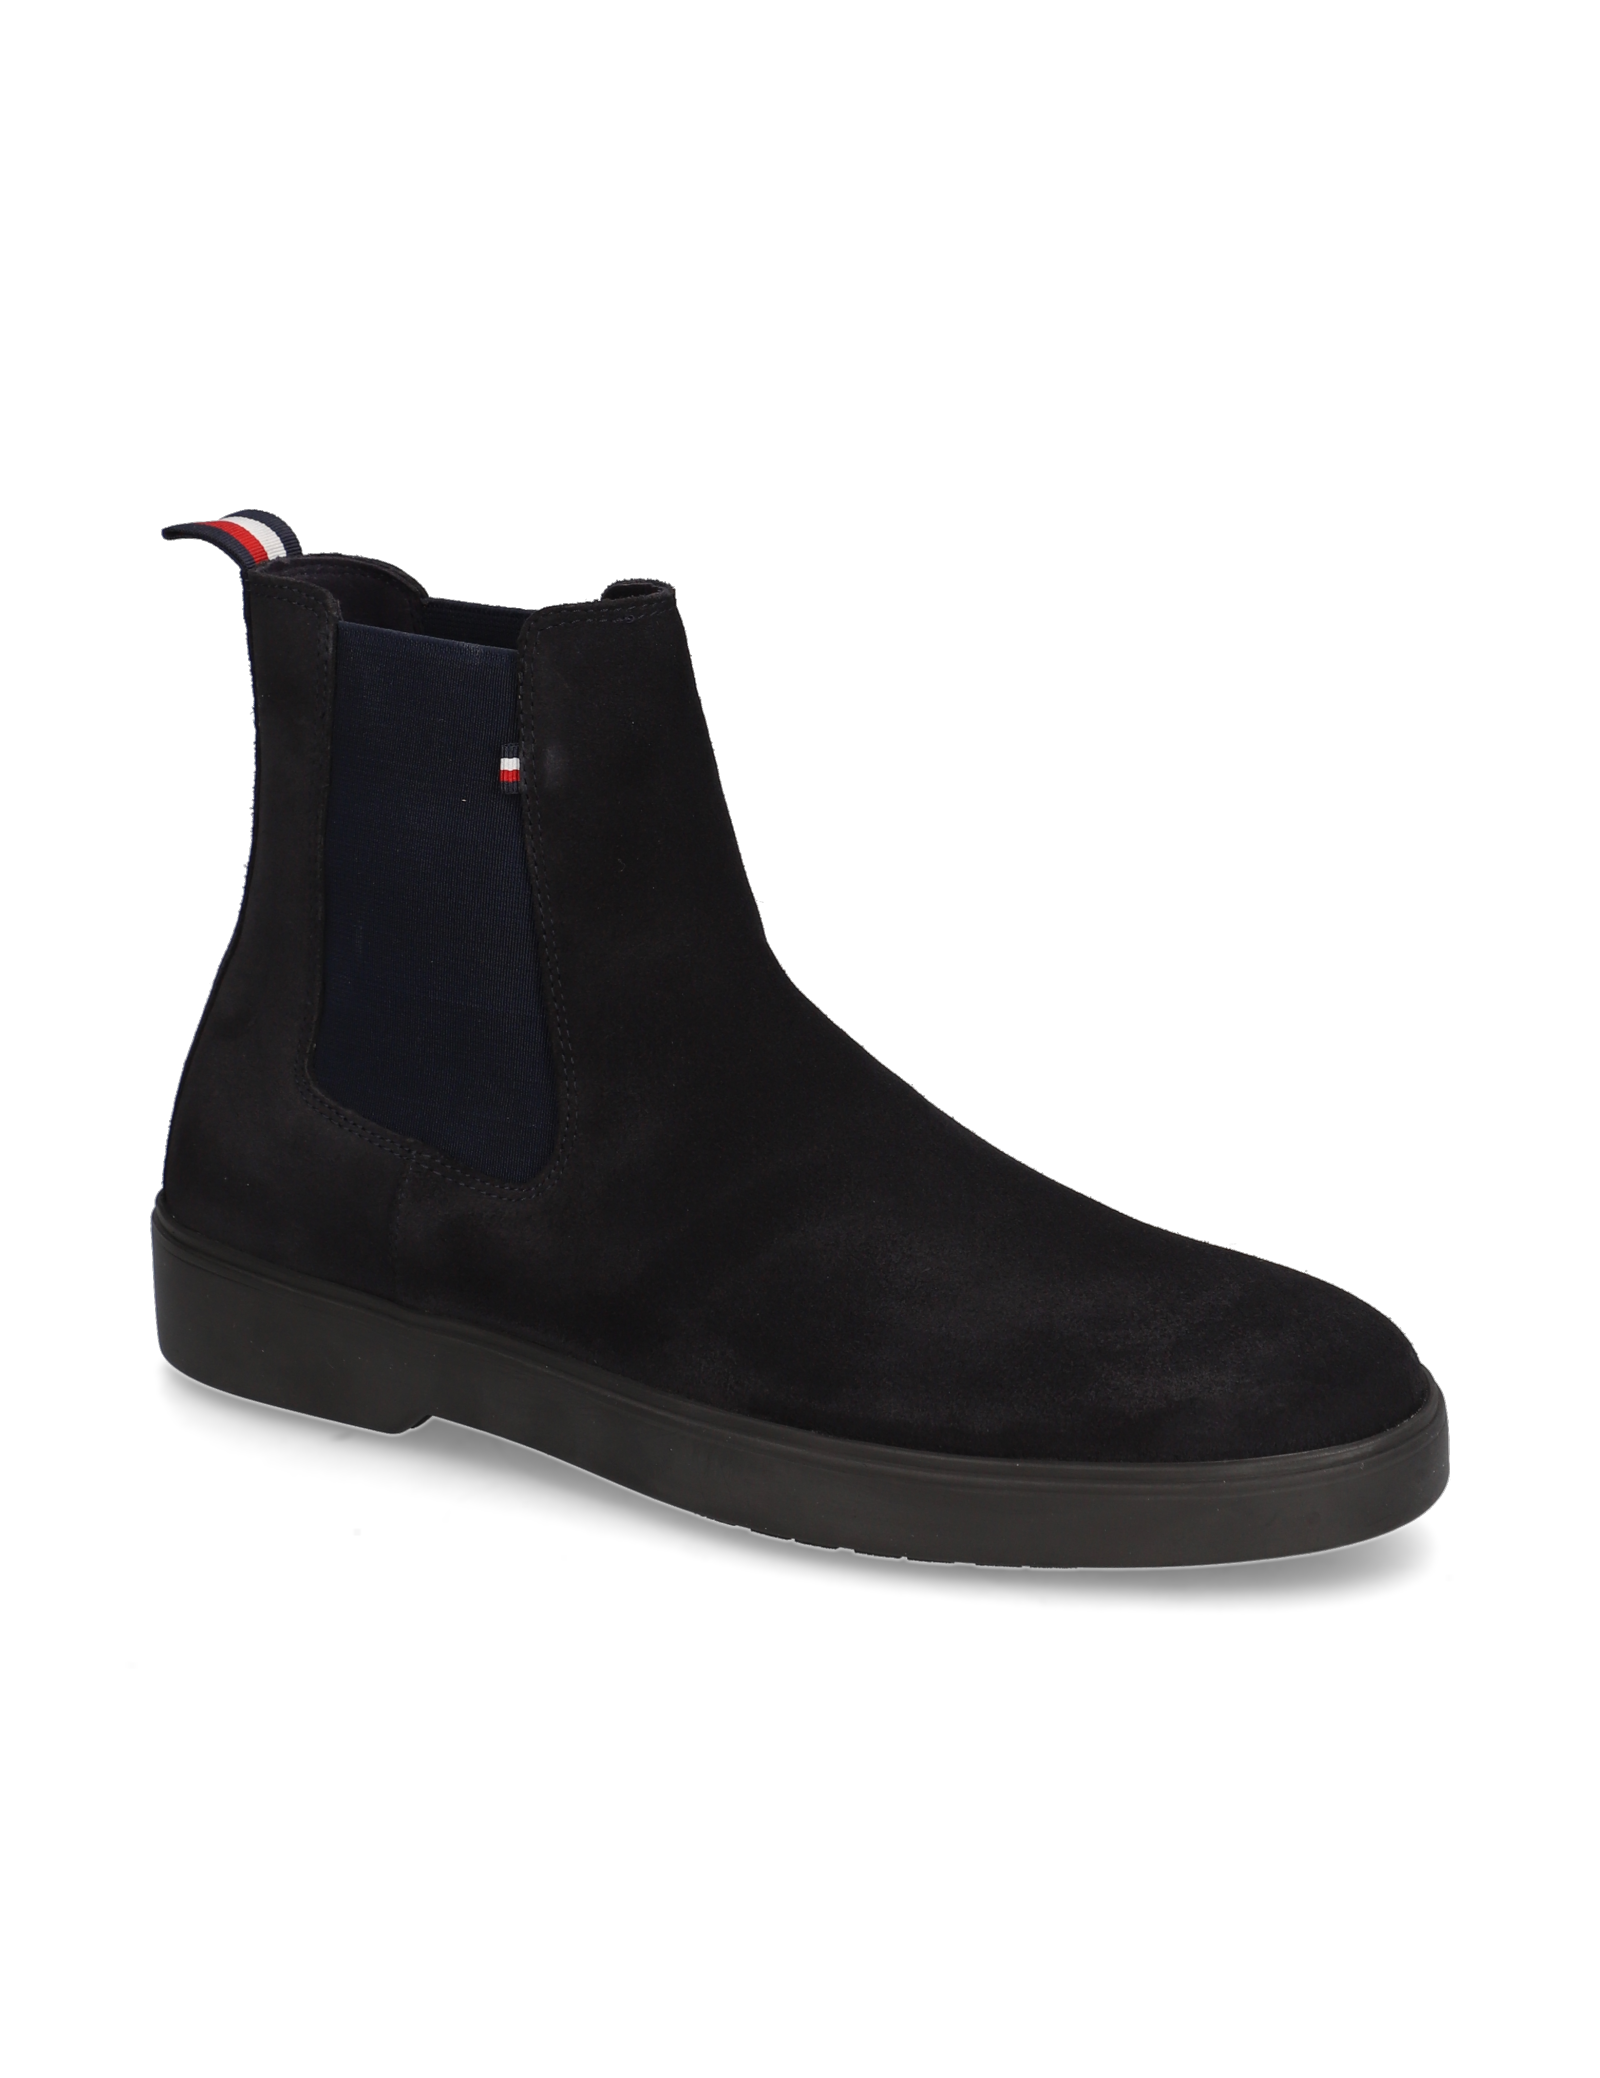 

Tommy Hilfiger CLASSIC HILFIGER SUEDE CHELSEA